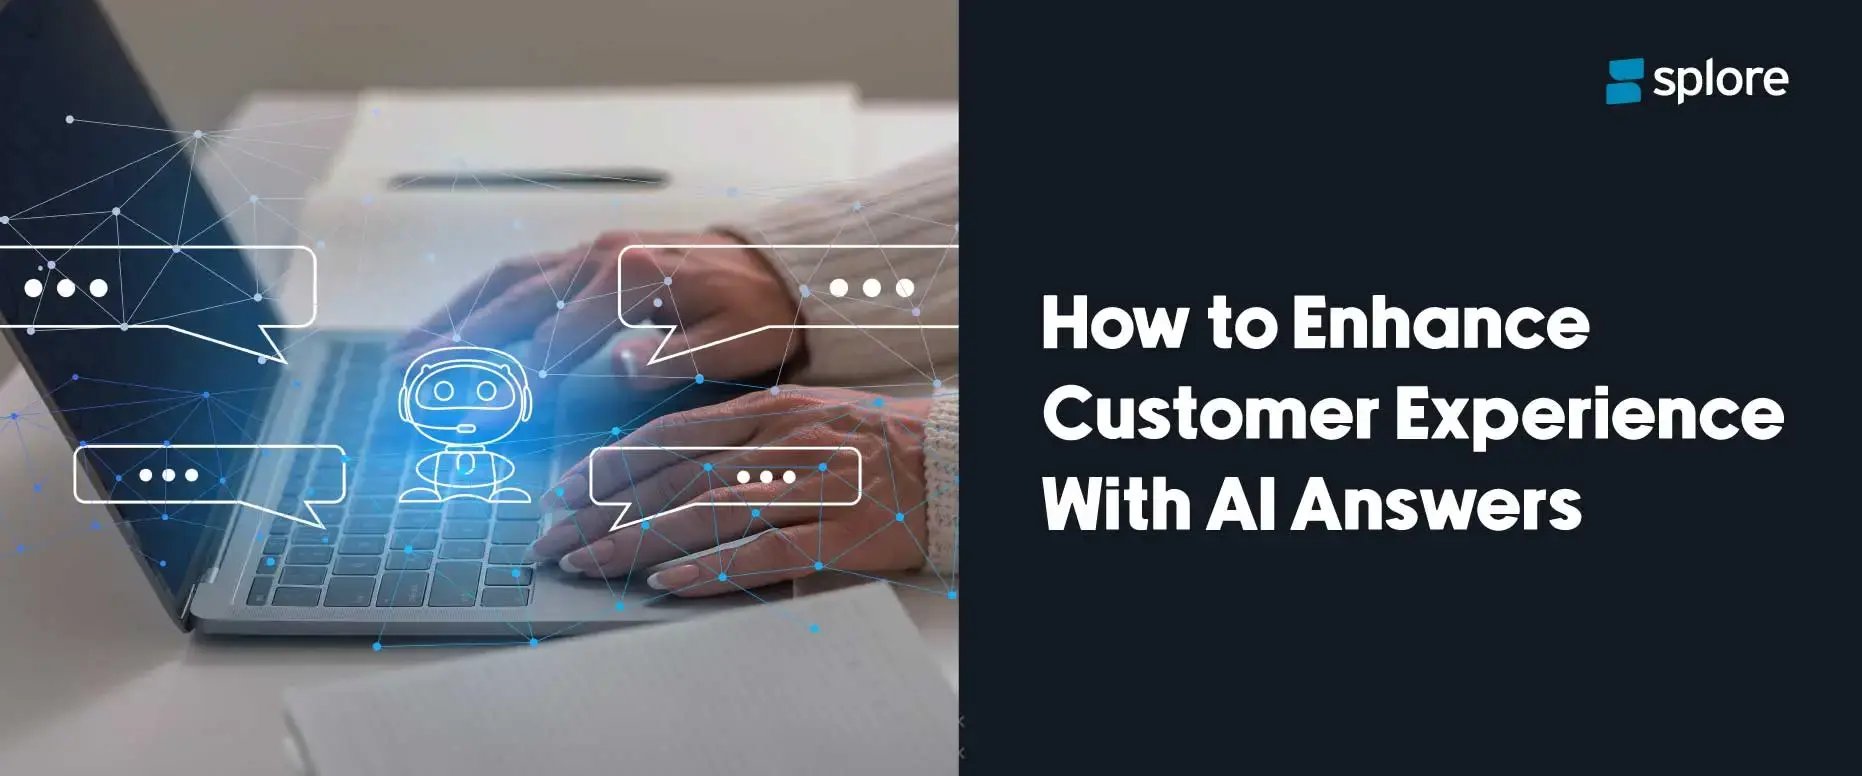 How to Enhance Customer Experience With AI Answers